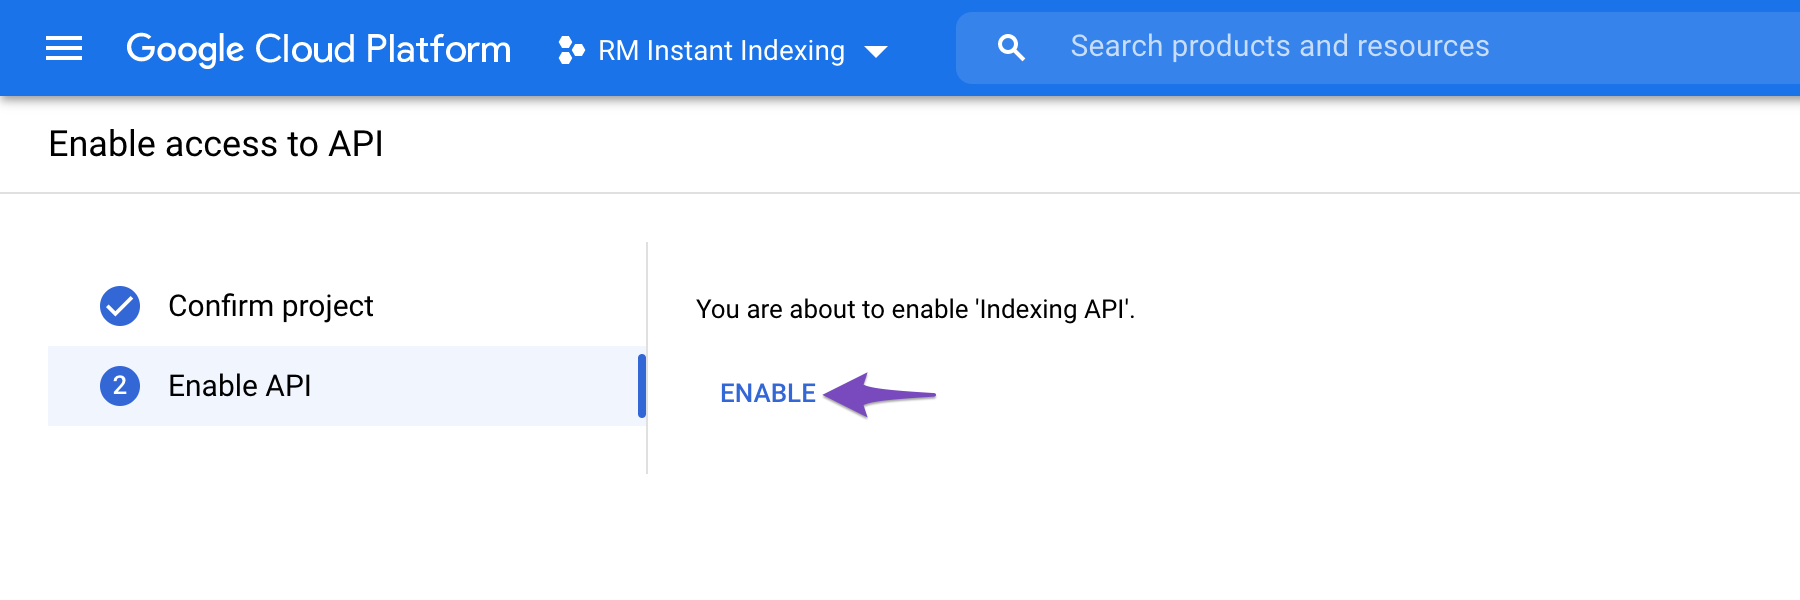 Enable Instant Indexing API